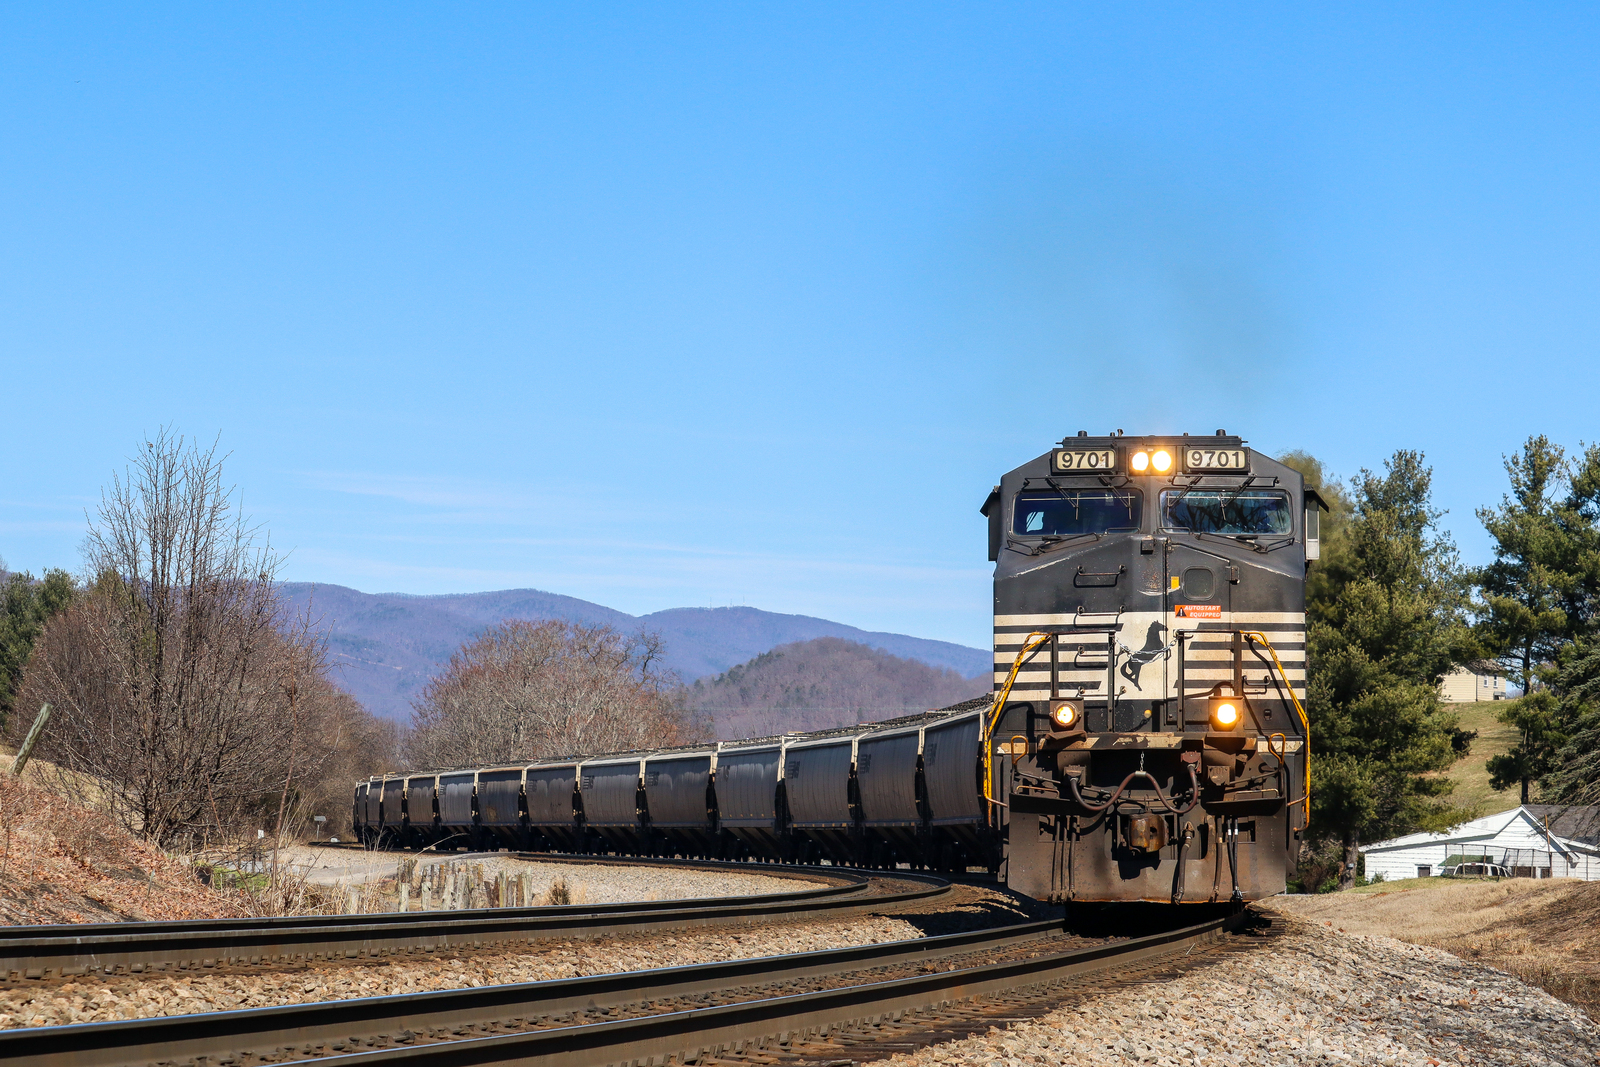 NS 9701 is a class GE C44-9W (Dash 9-44CW) and  is pictured in Shawsville , Virginia, USA.  This was taken along the NS Christiansburg District  on the Norfolk Southern Railway. Photo Copyright: Robby Lefkowitz uploaded to Railroad Gallery on 02/20/2023. This photograph of NS 9701 was taken on Saturday, February 18, 2023. All Rights Reserved. 